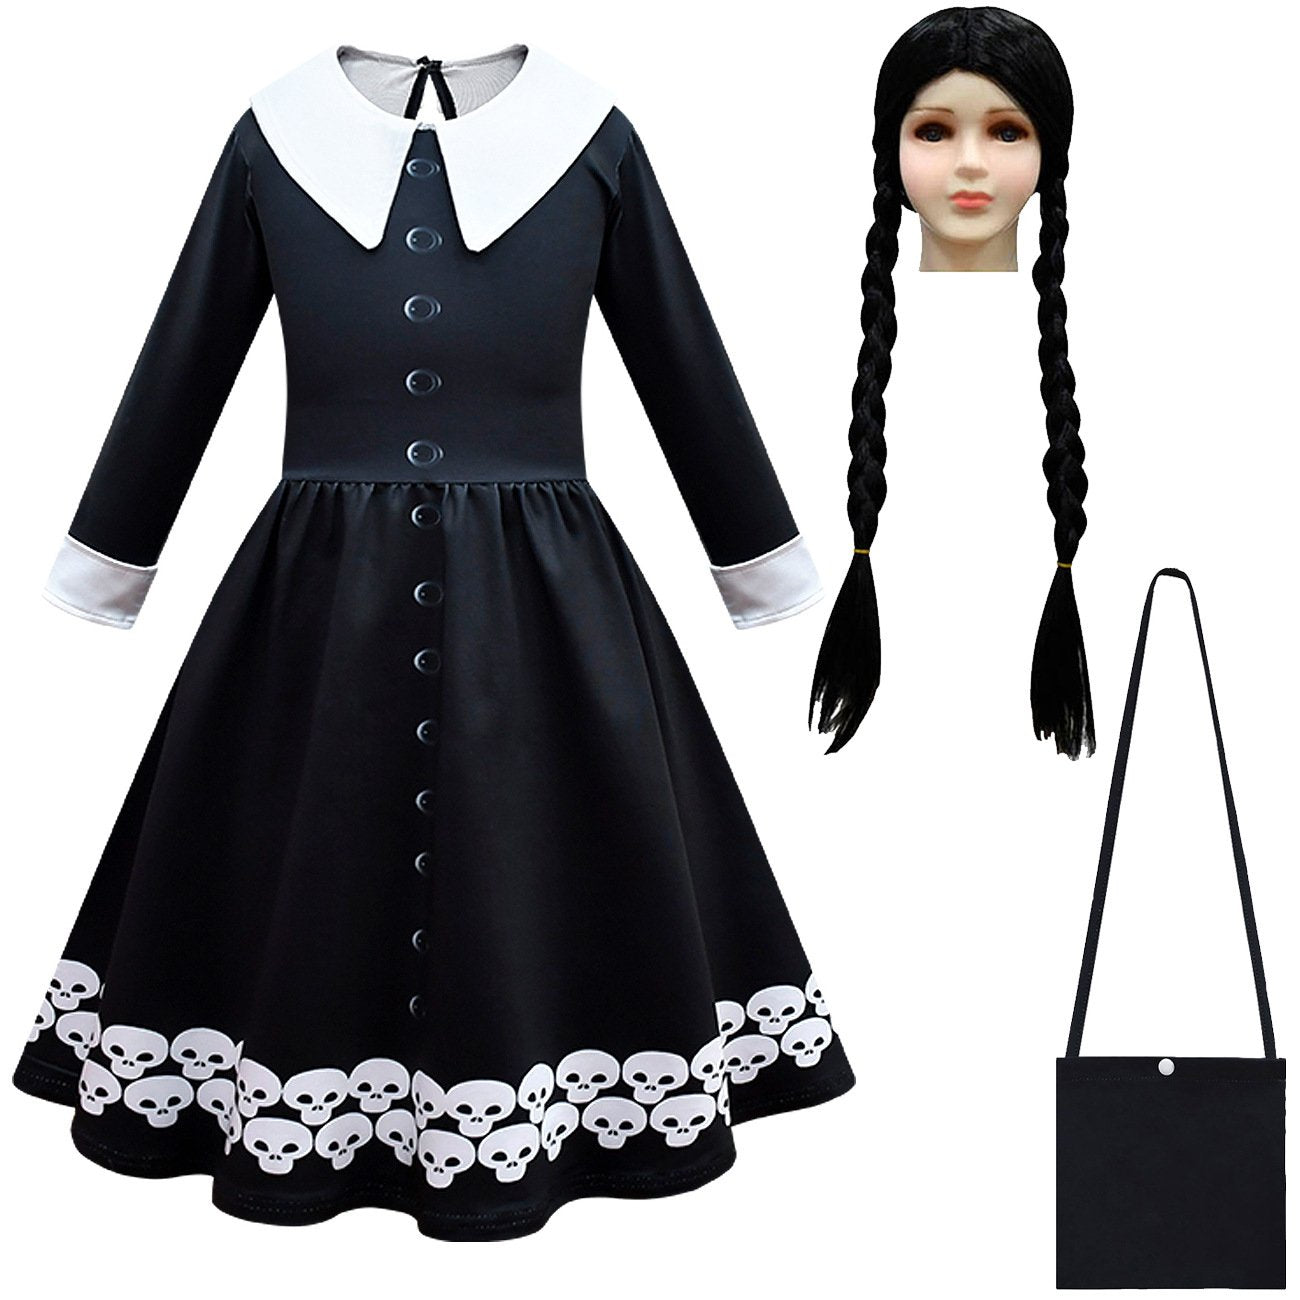 Wednesday Costume The Addams Family Cosplay Lapel Mid Length Dress For Kids